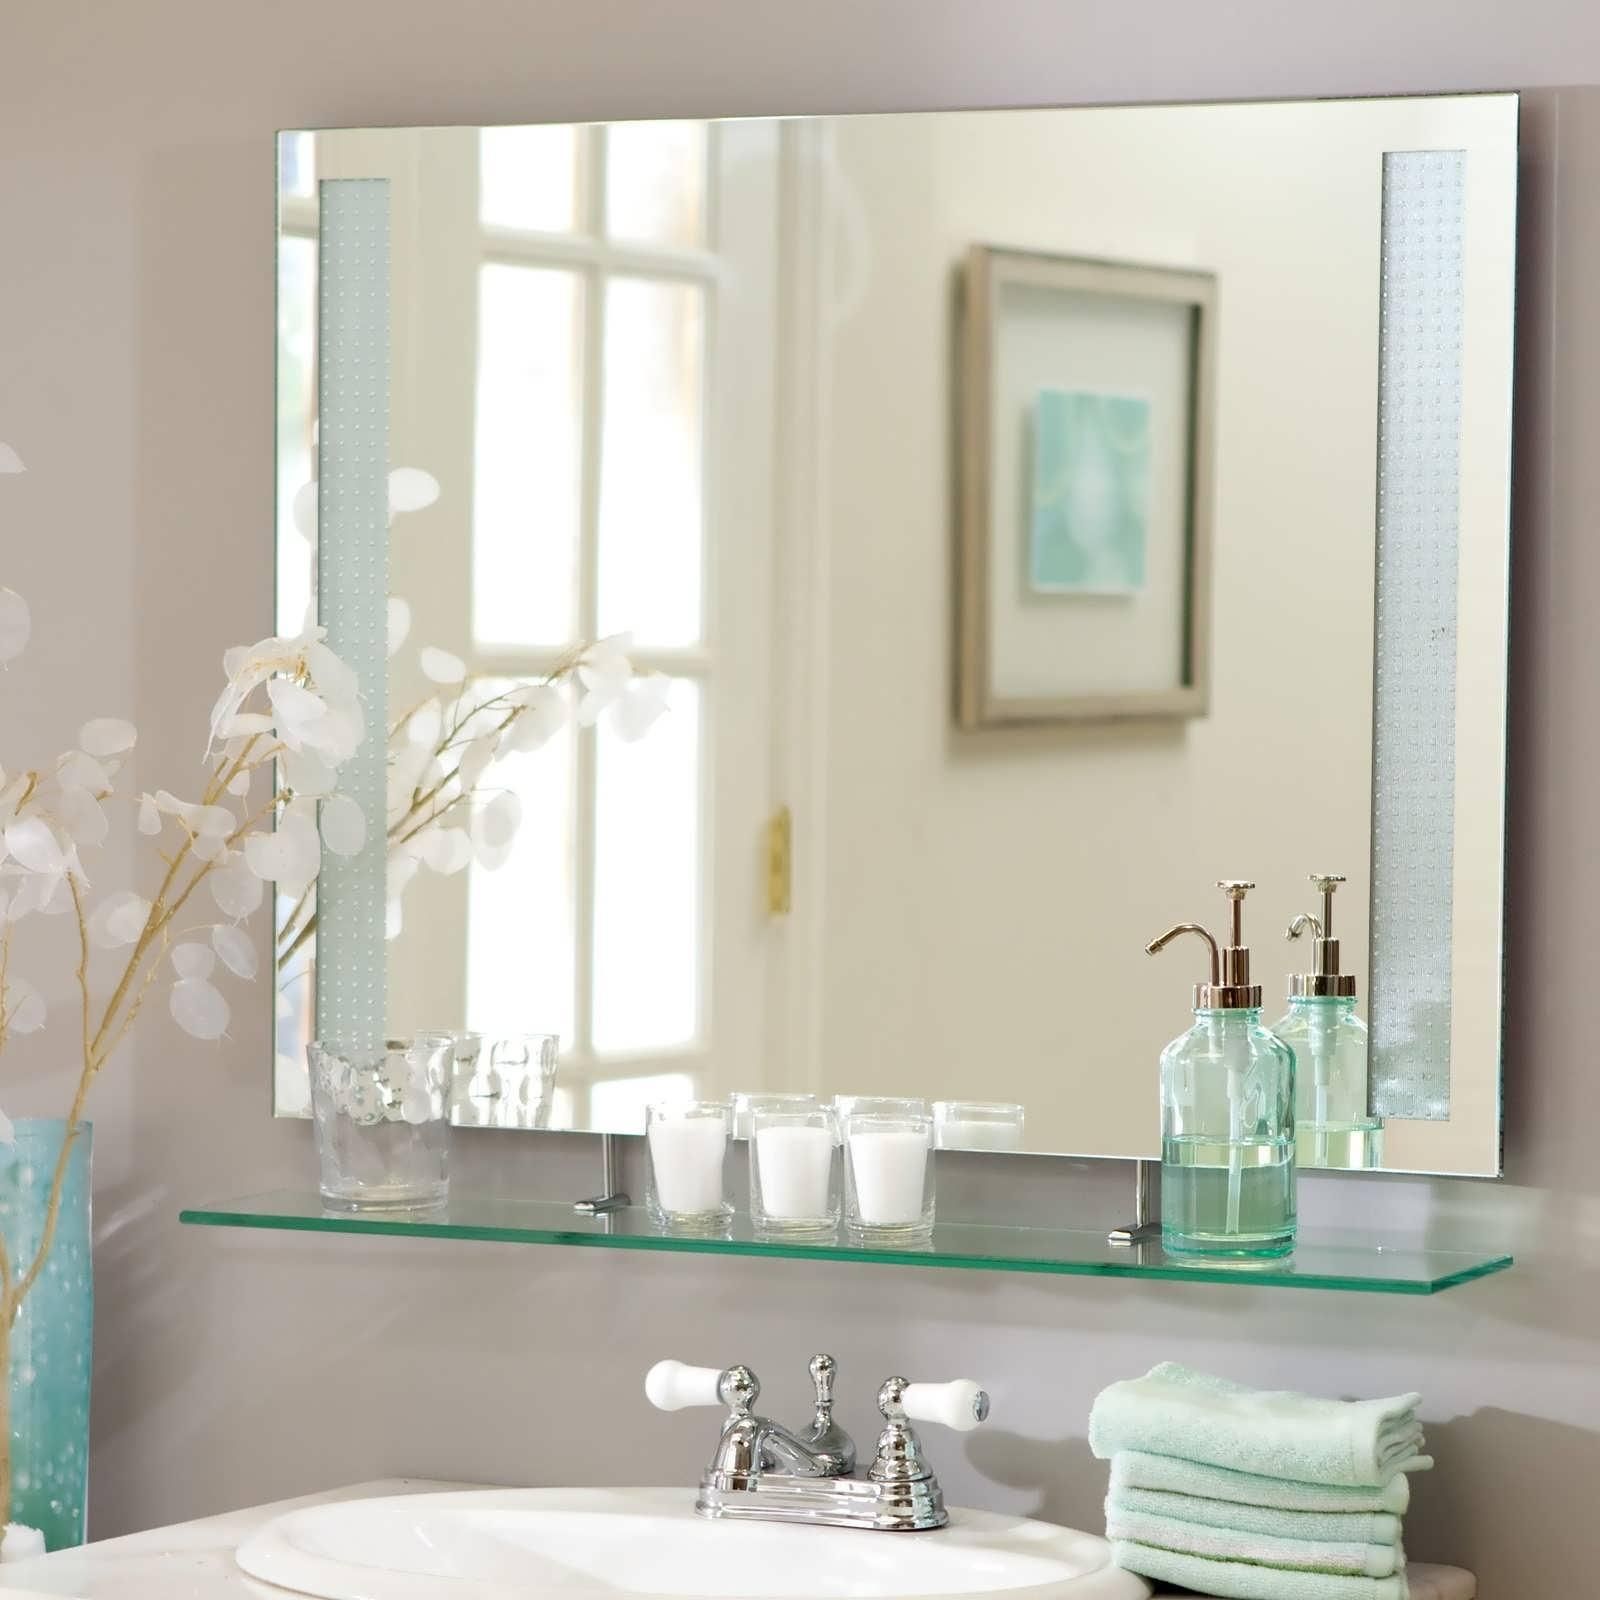 Bathroom Wall Mirrors: Reflections Of Style And Function